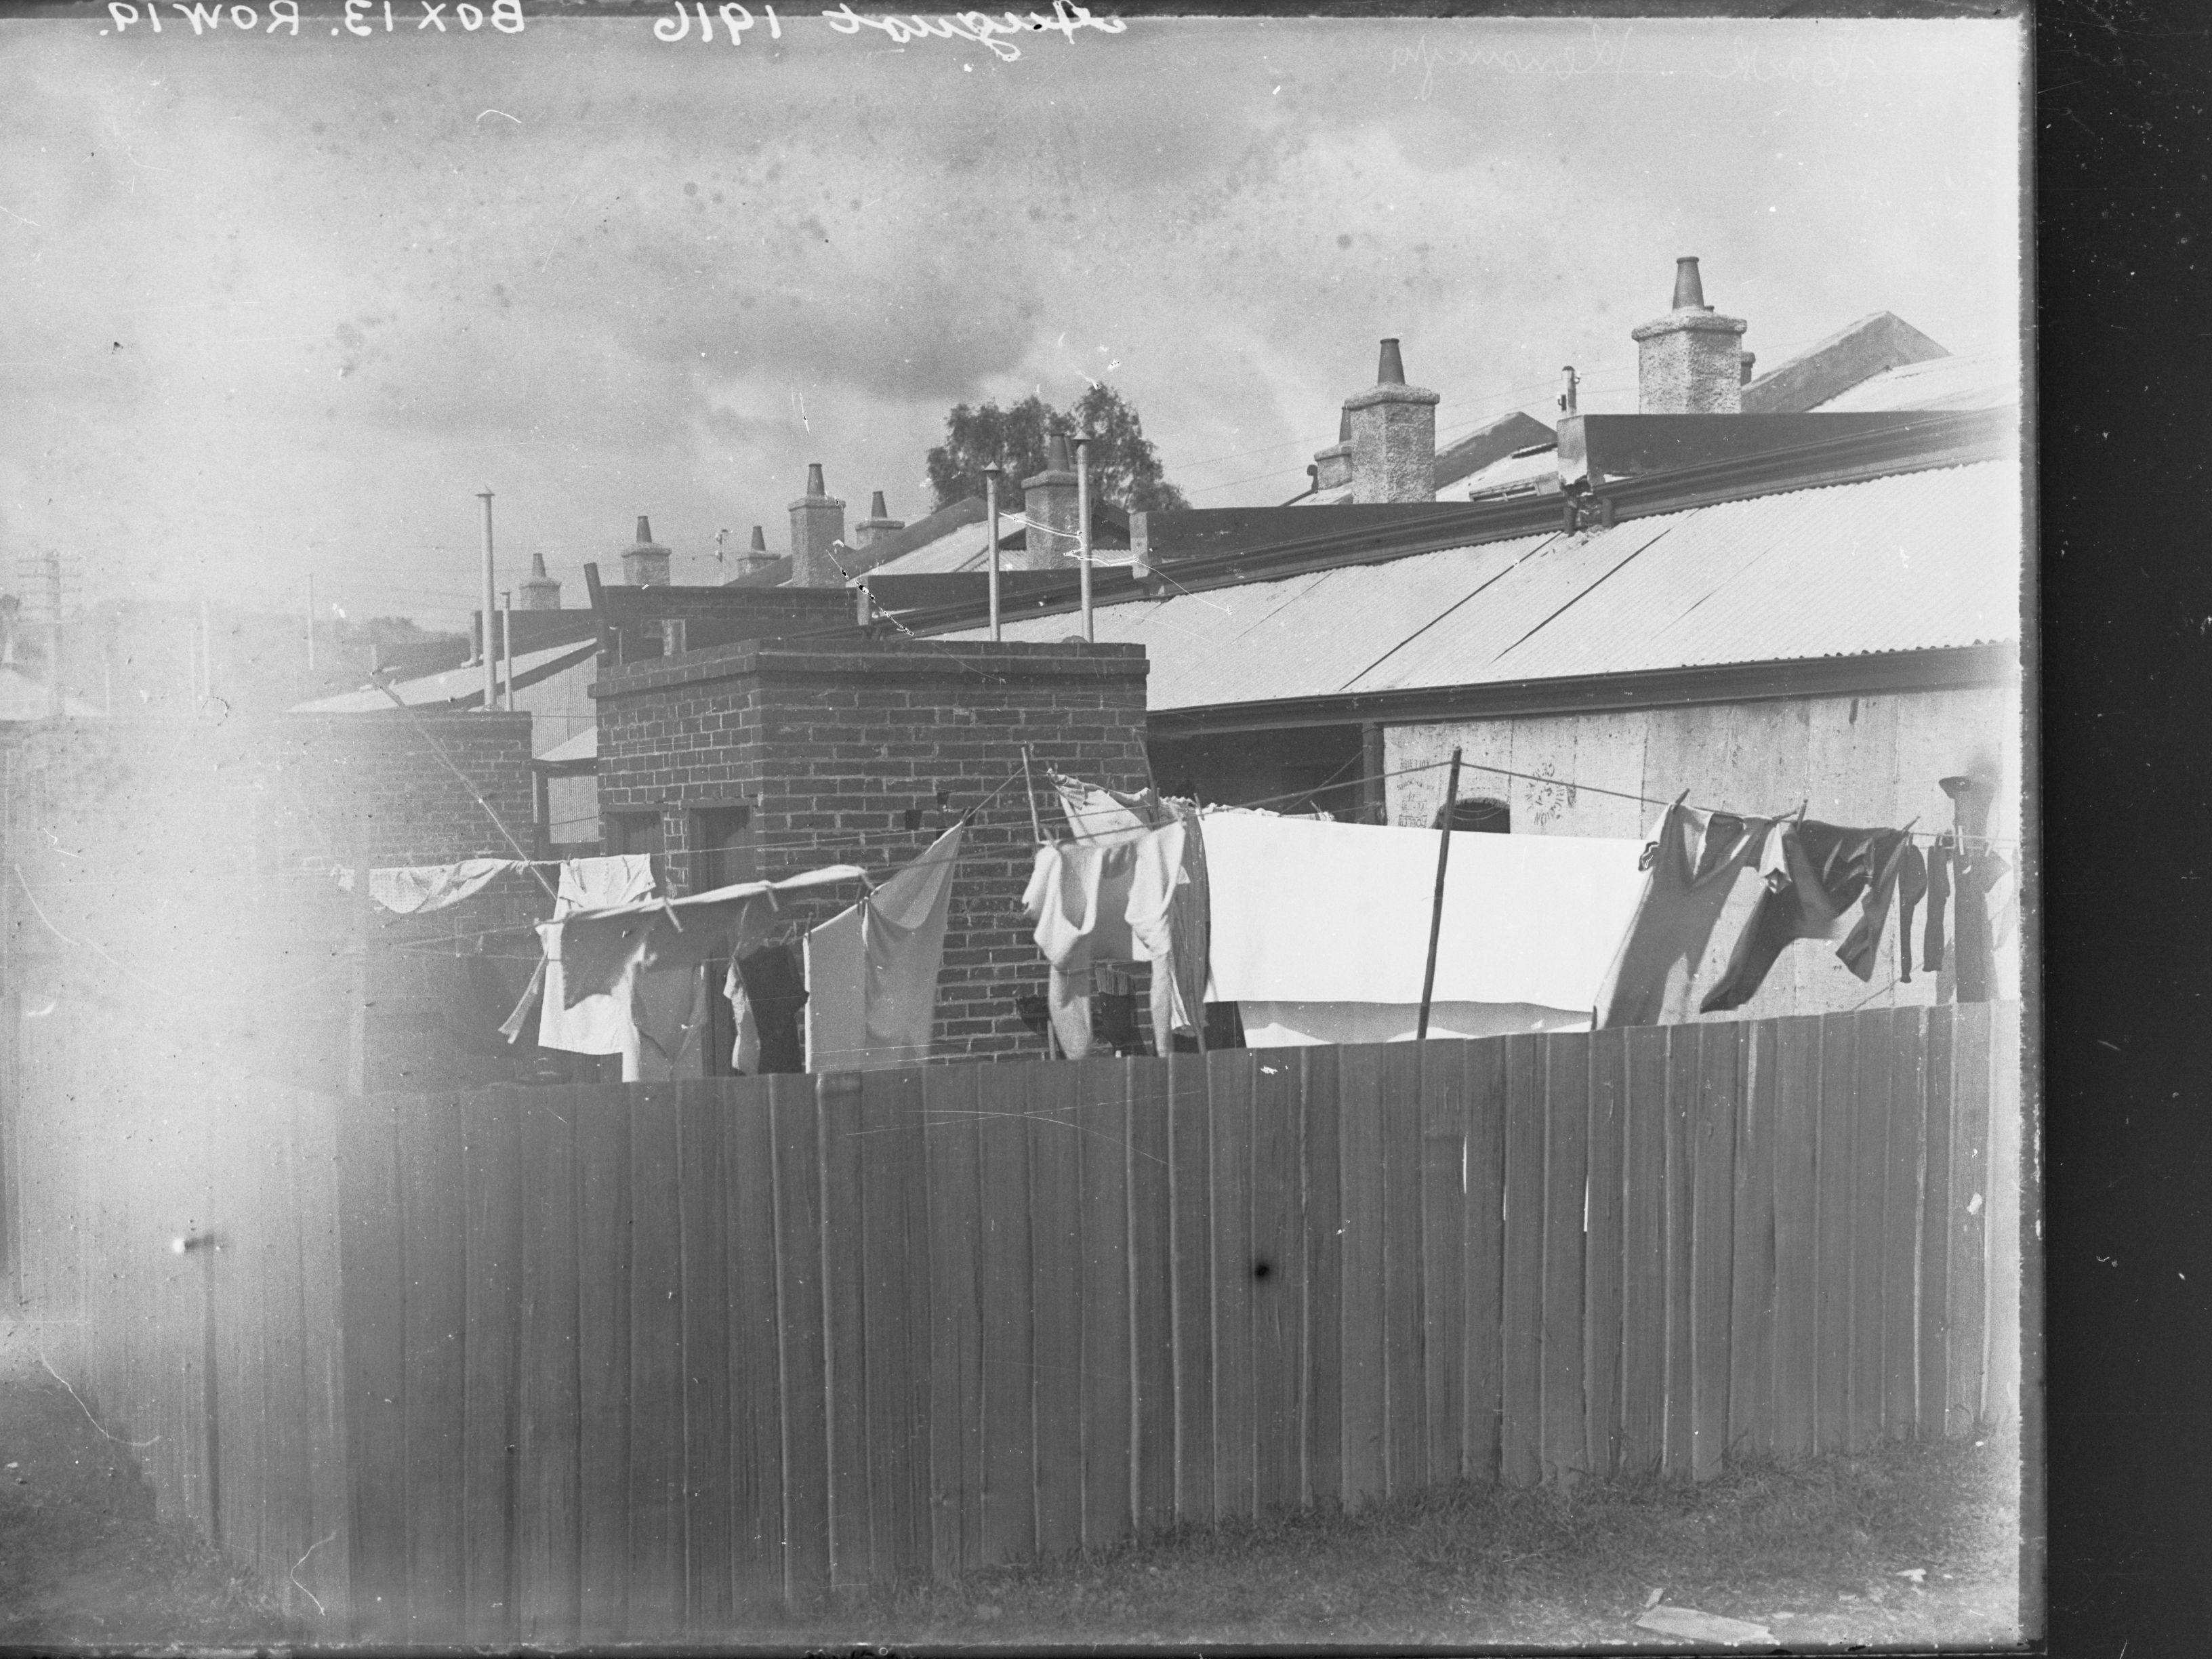 A black and white photograph of a fenced-in backyard. There are clothes hanging on a clothes line, visible behind the fence.